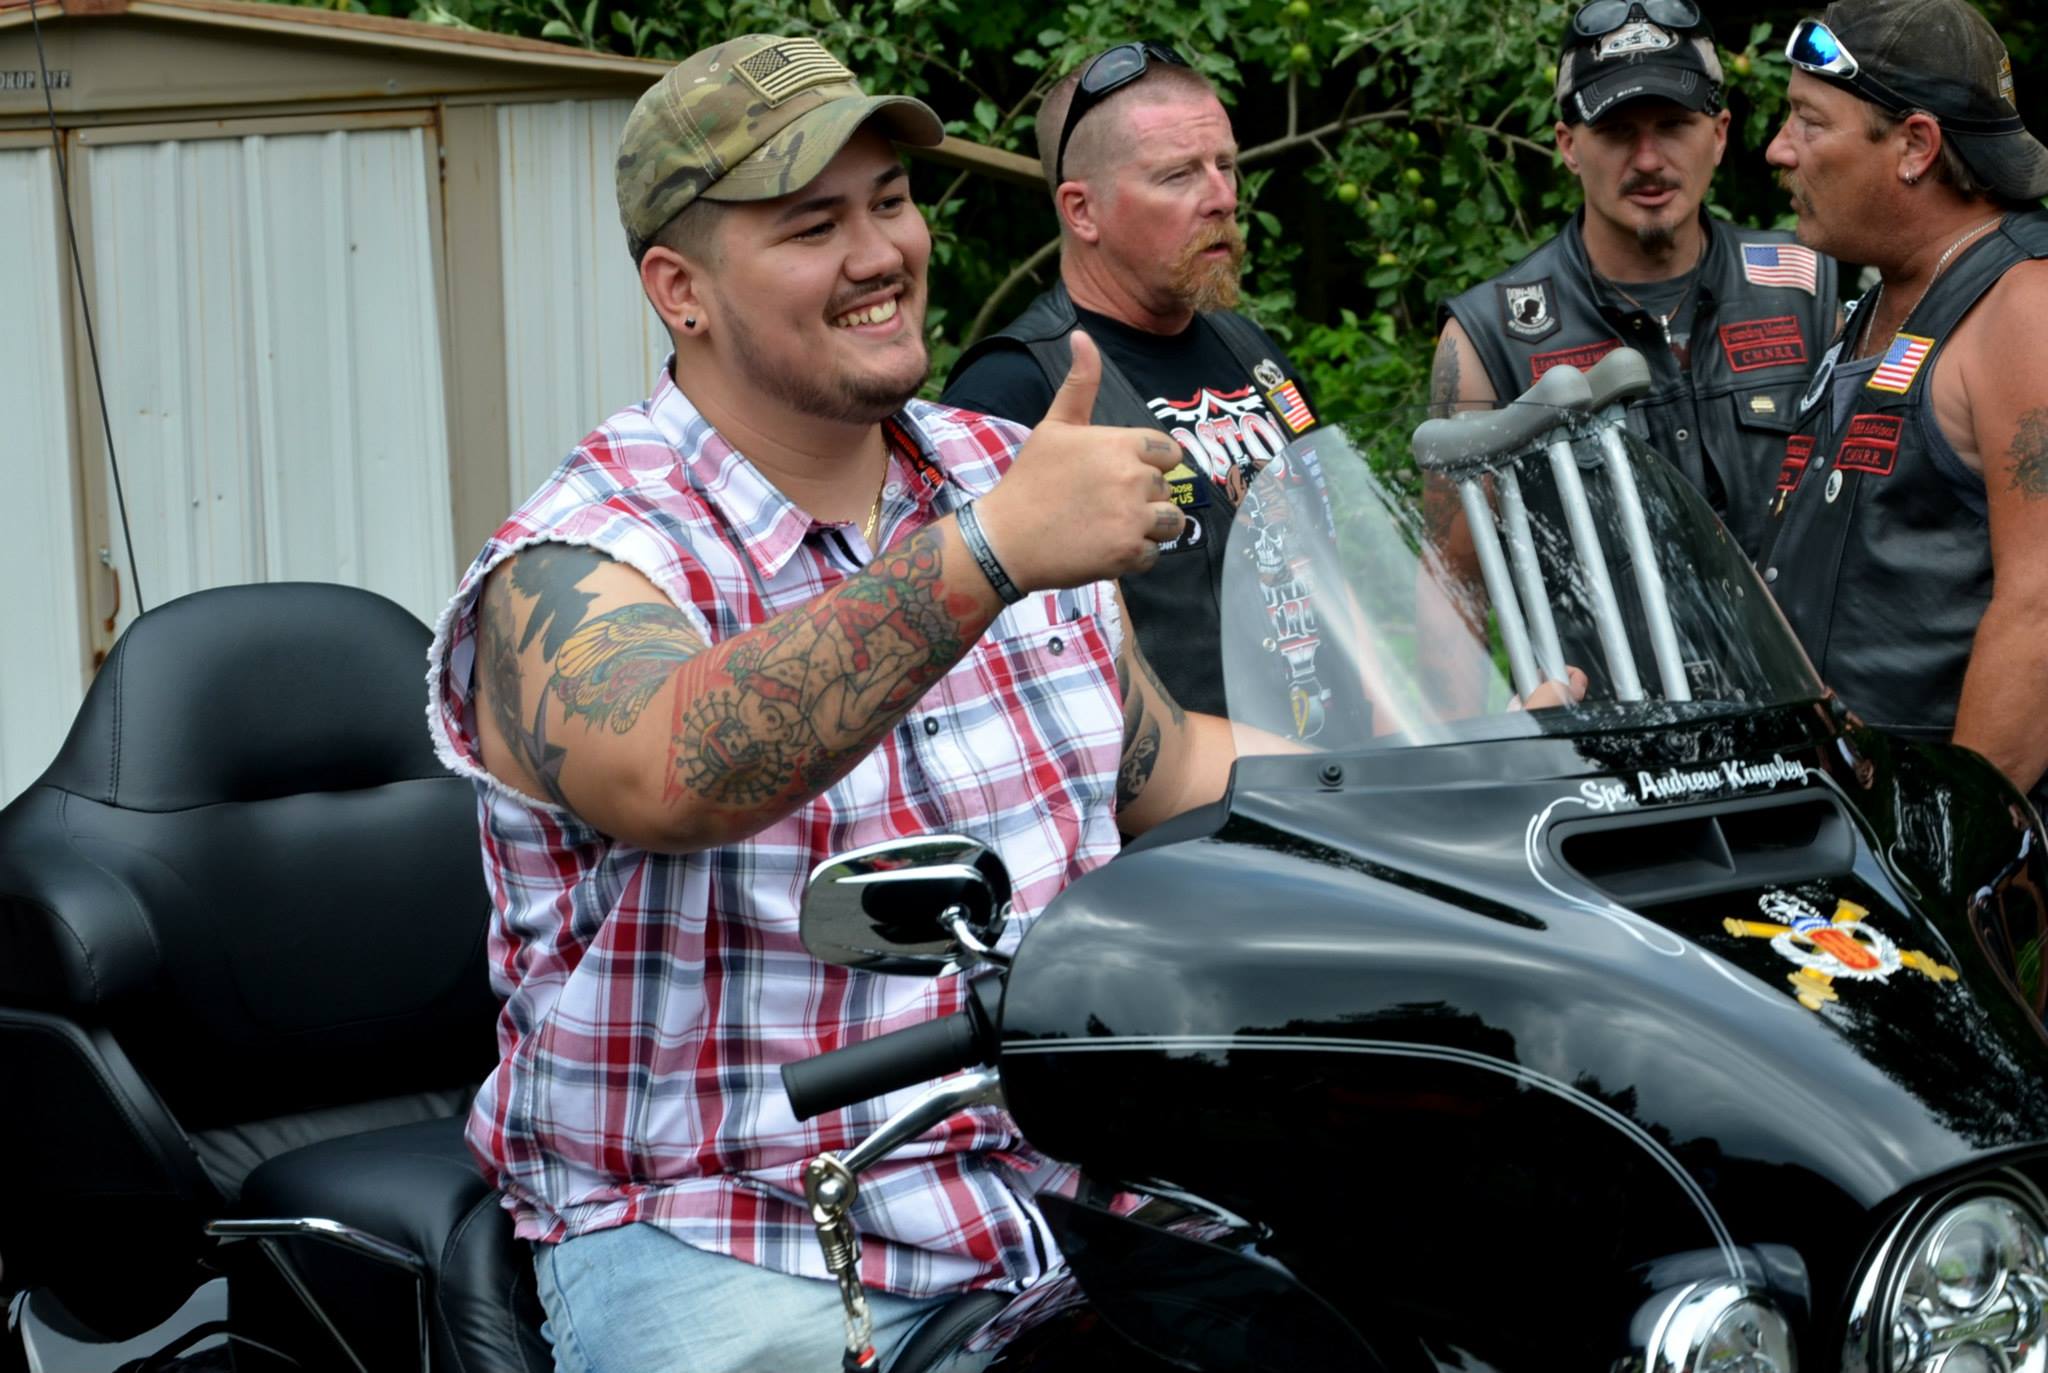 Boston Wounded Vet MC Ride presents Andy Kingsley his New 2014 Modified Trike12